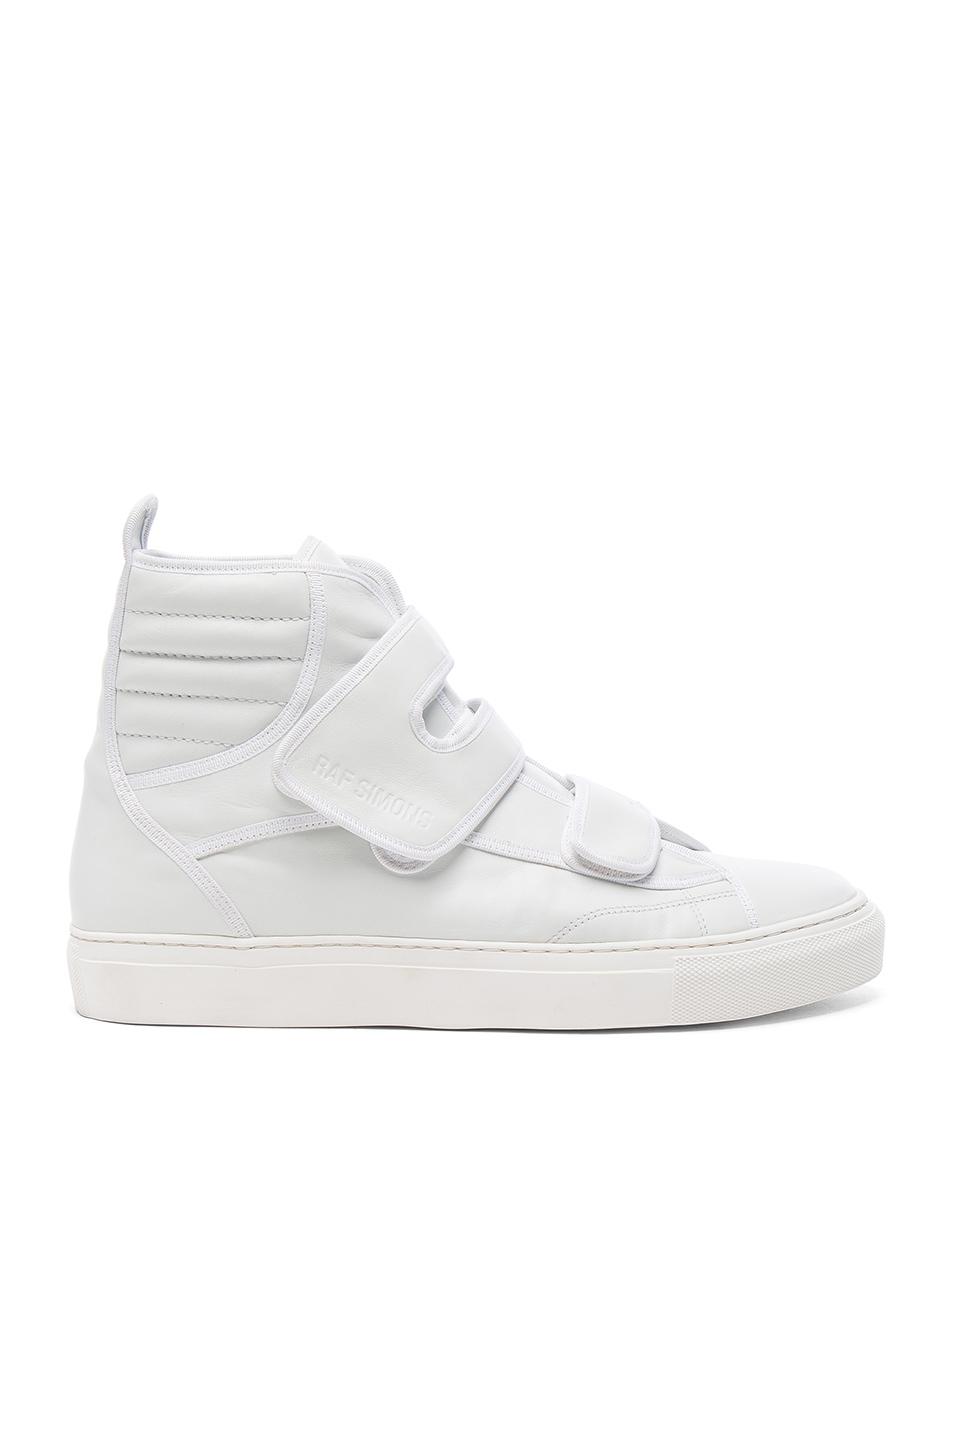 Pompeji ting Bageri Raf Simons High Top Velcro Sneakers in White | Lyst